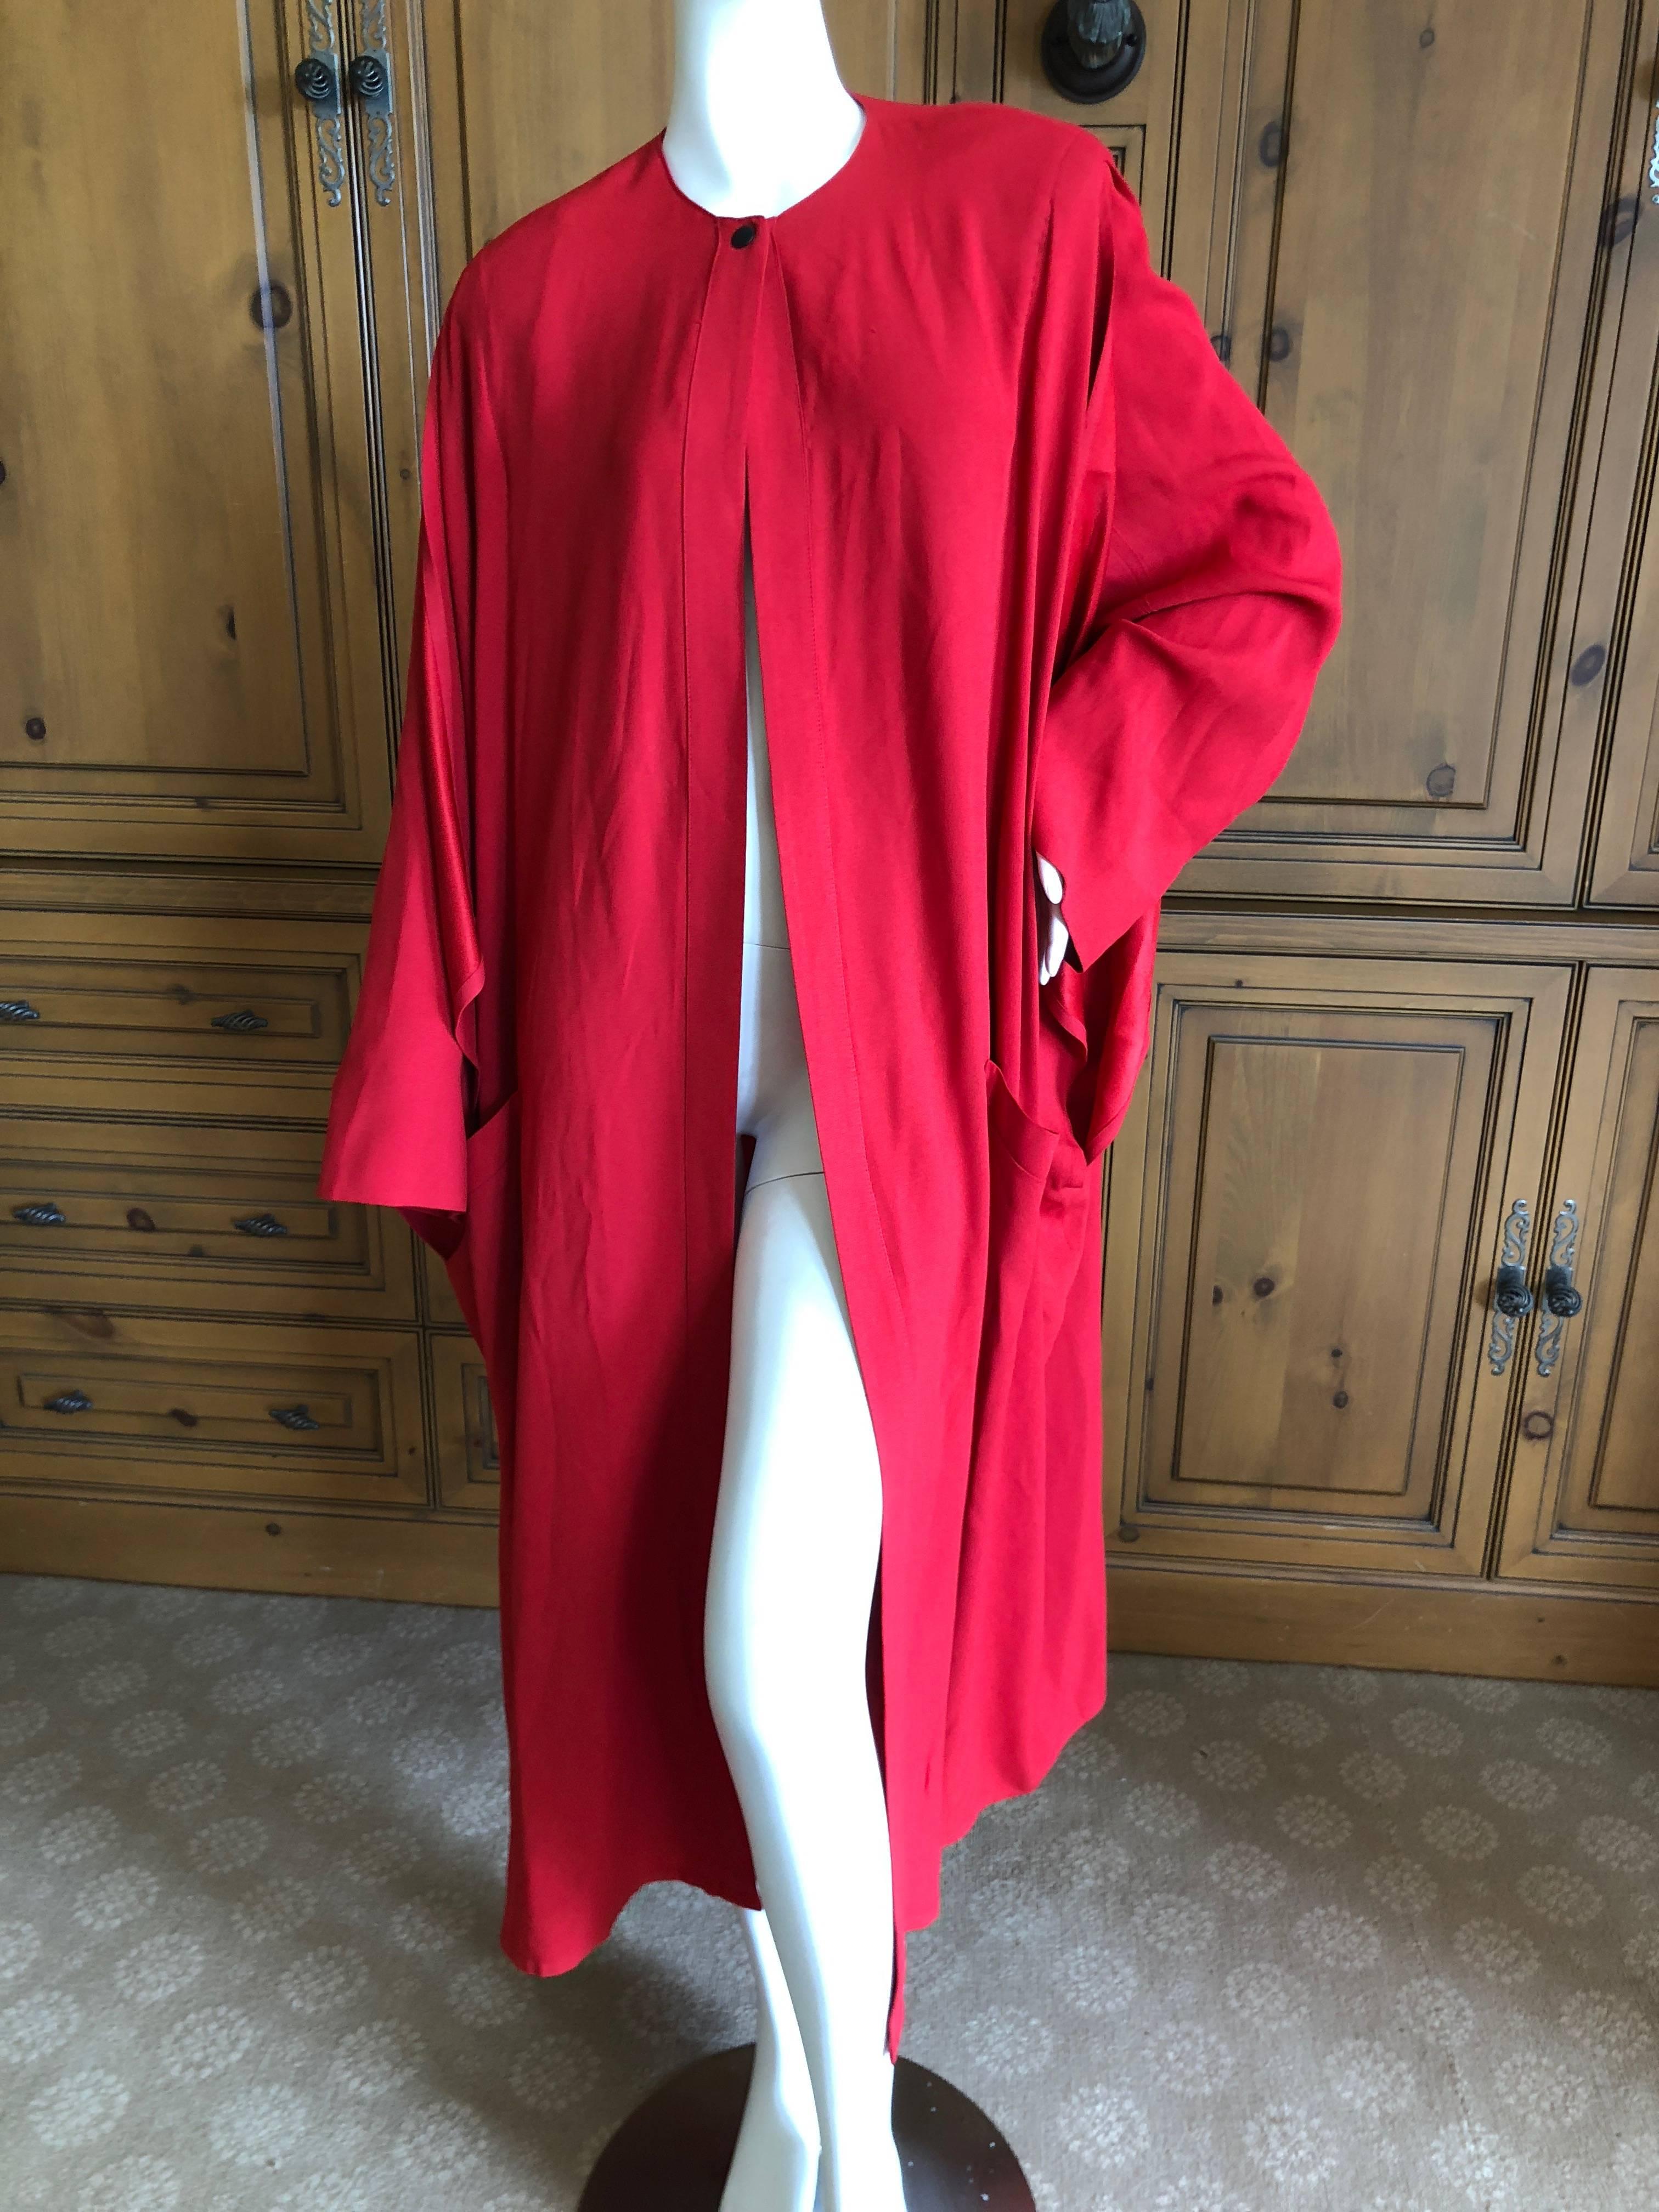 Sonia Rykiel Vintage 1980's Red Side Slashed Kimono Style Coat In Excellent Condition For Sale In Cloverdale, CA